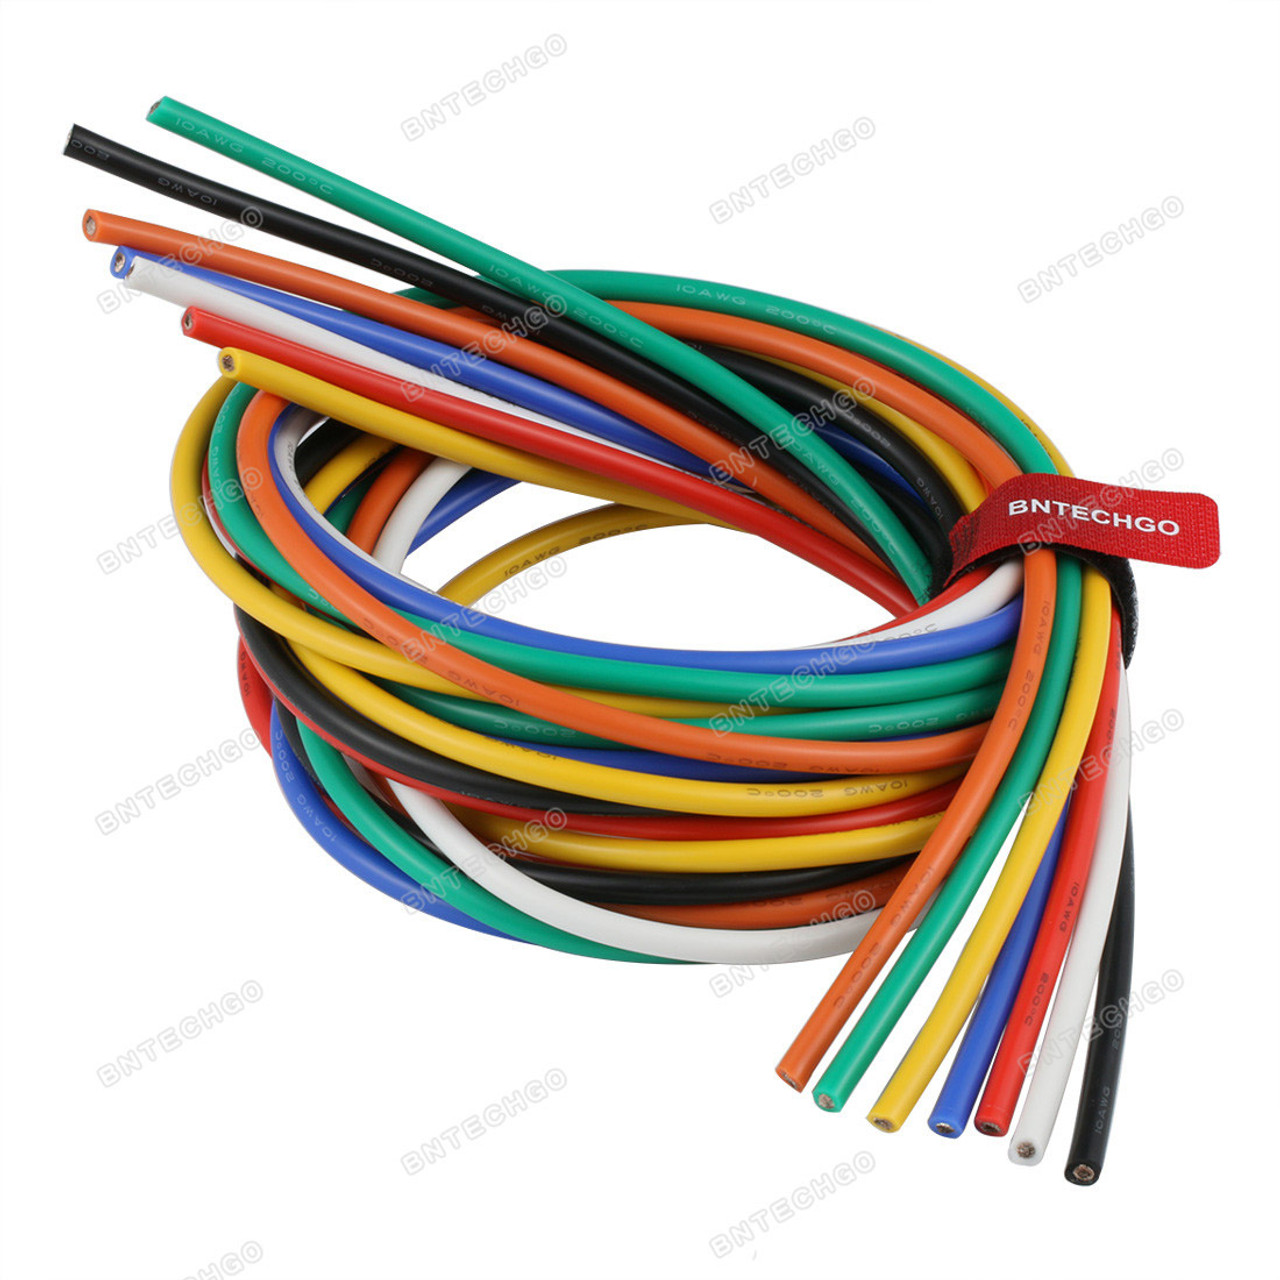 Copper 10 Gauge Cables, Copper Electrical Wire